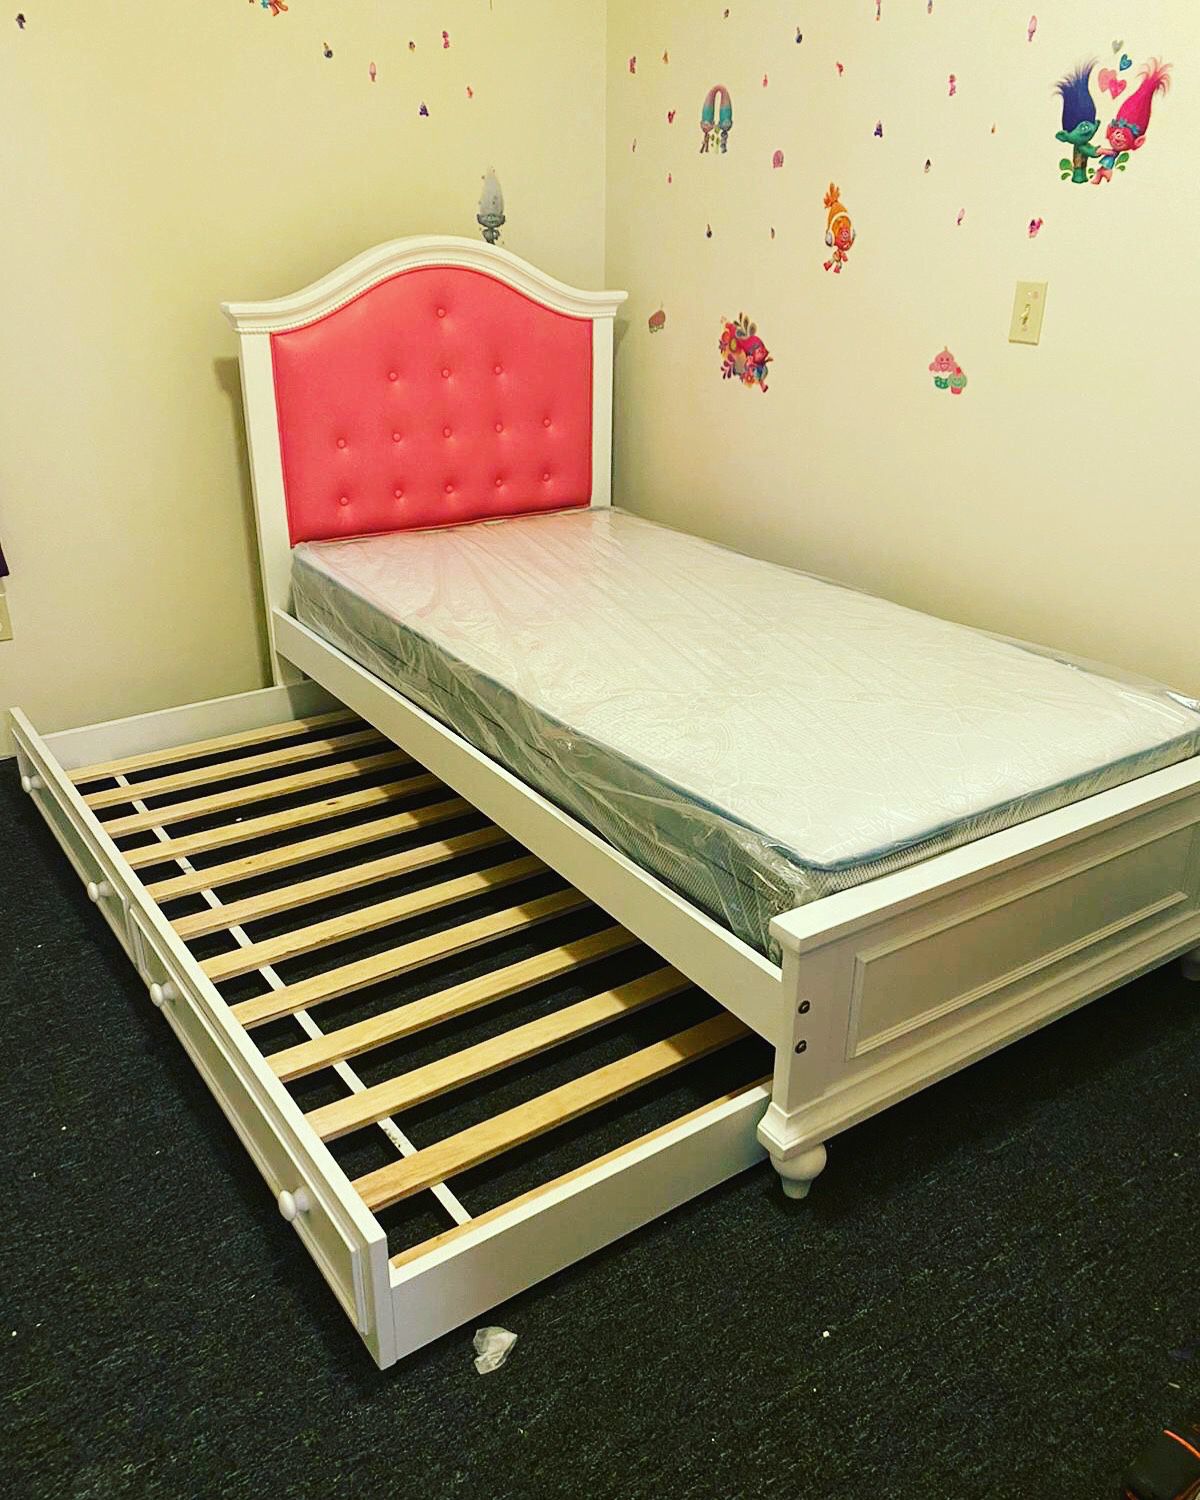 Brand new twin size over twin size trundle bed frame pink color > 🚚🚚🚚🚚